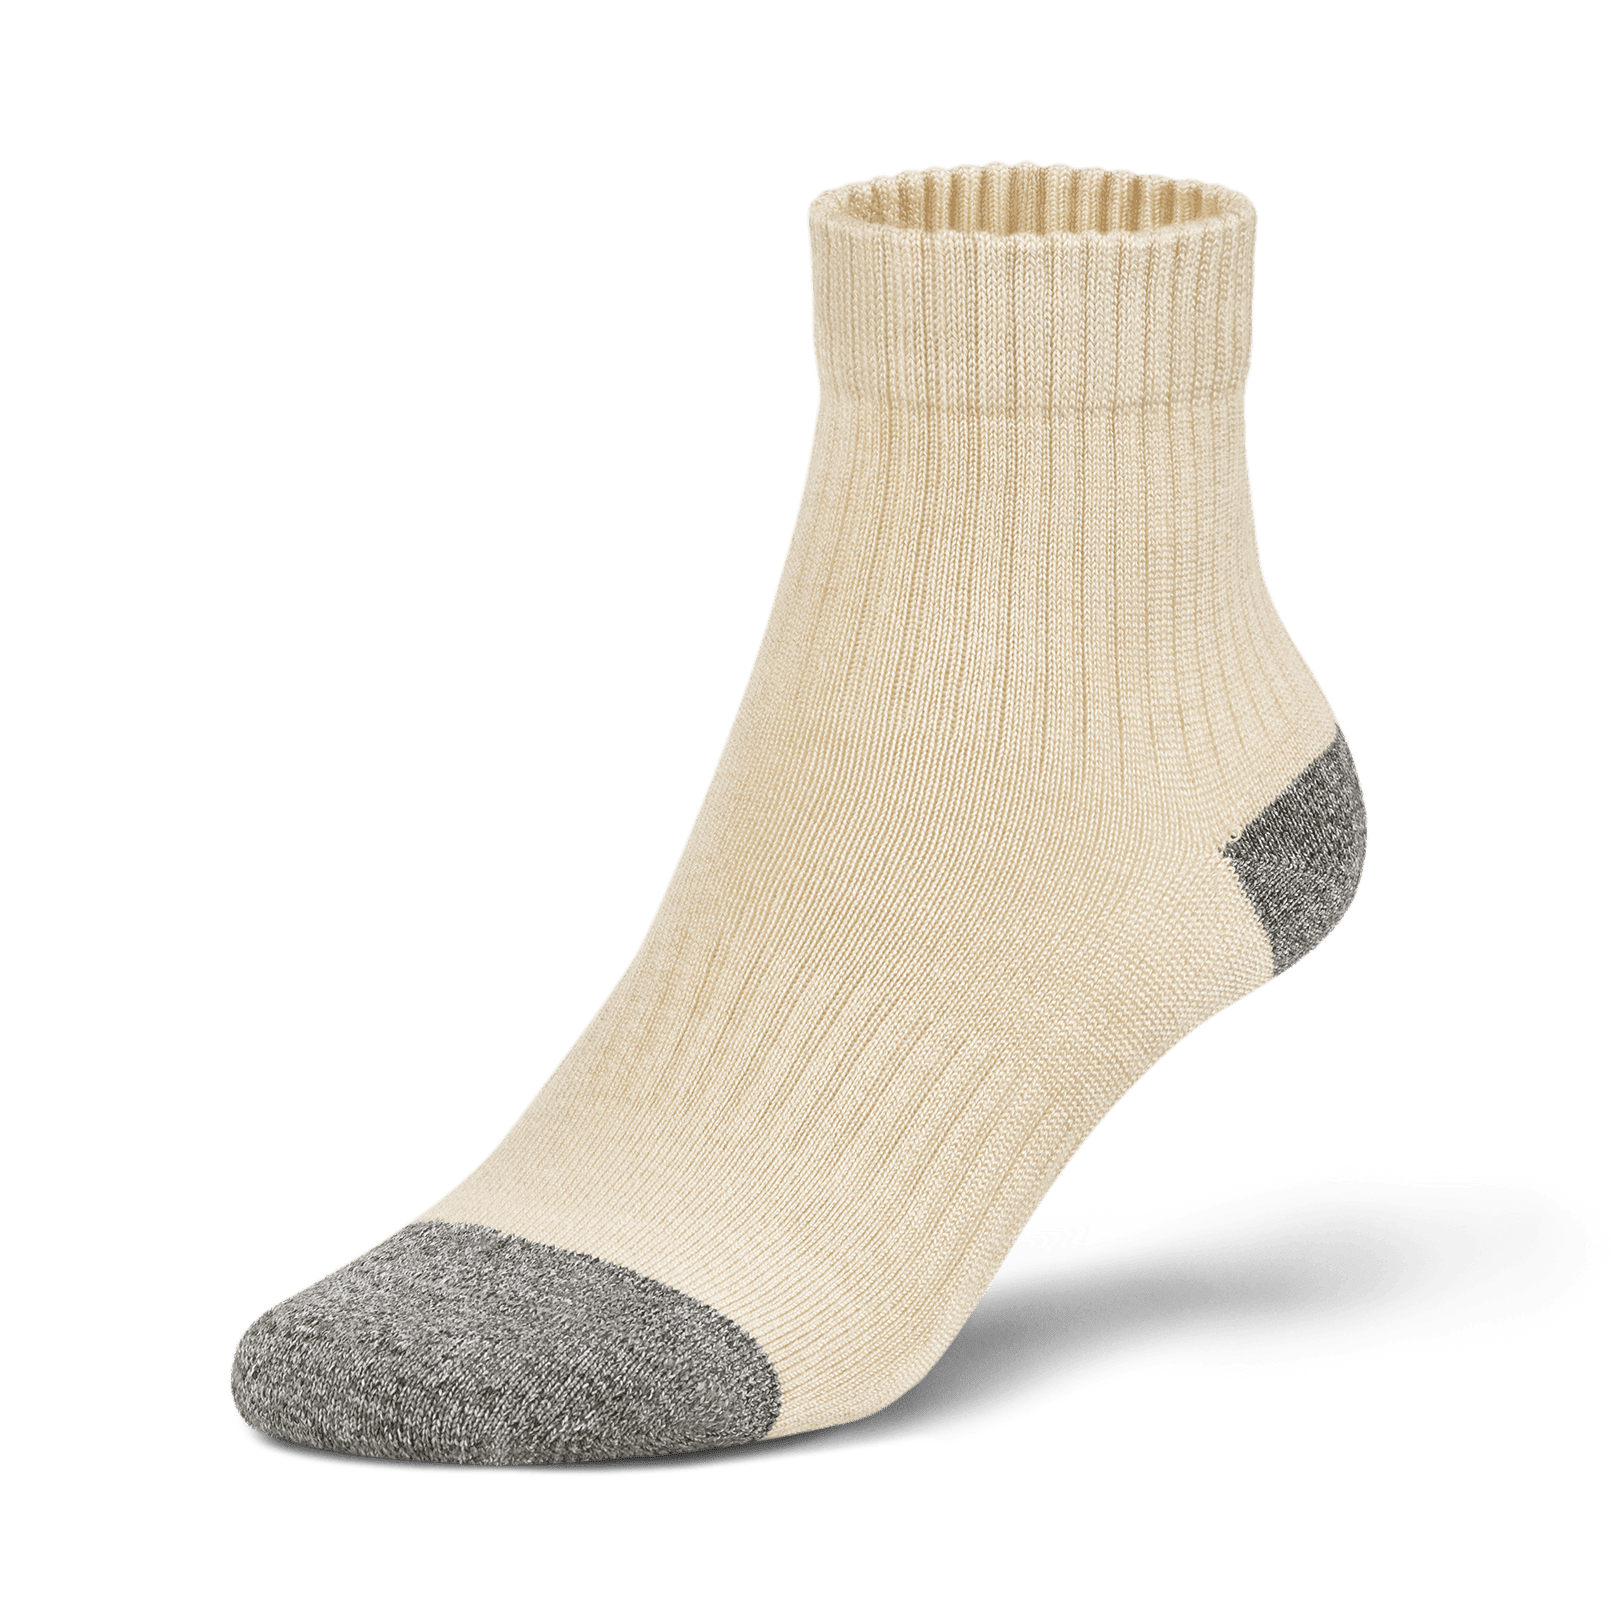 SQ1URWH SOCKS WHEAT RIBBER FRONT